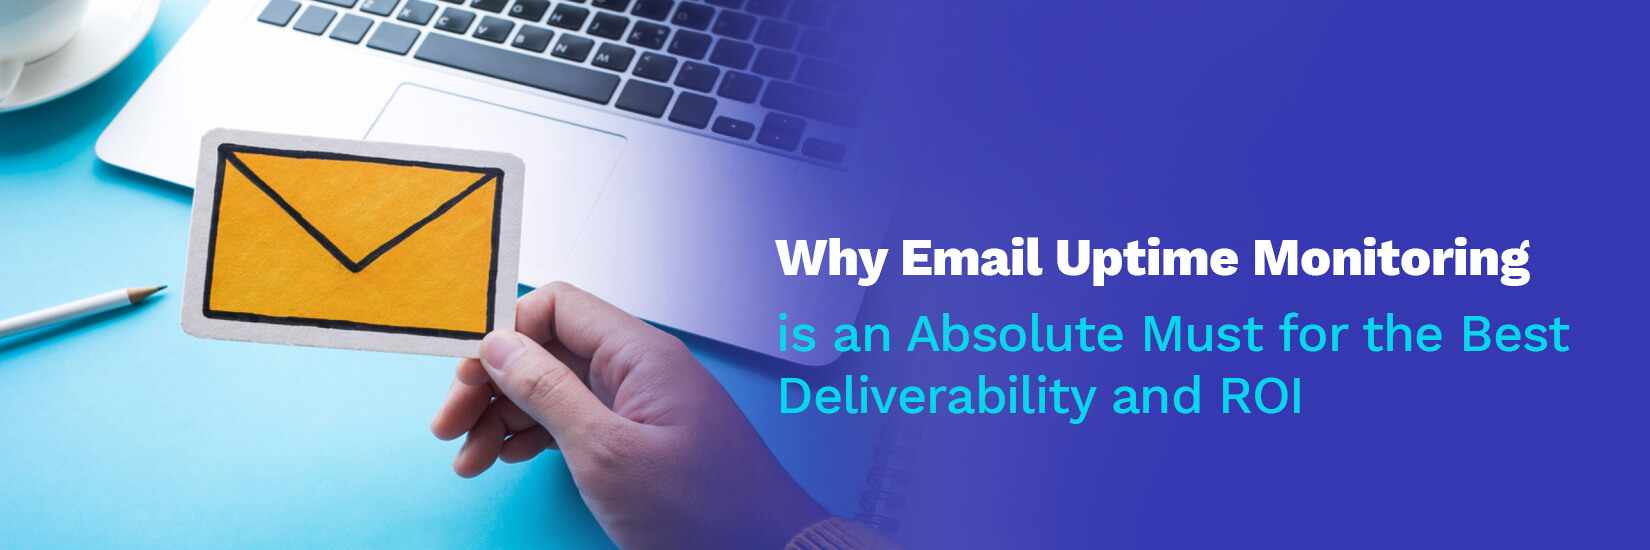 Why Uptime Monitoring Is A Must For Best Email Deliverability & ROI